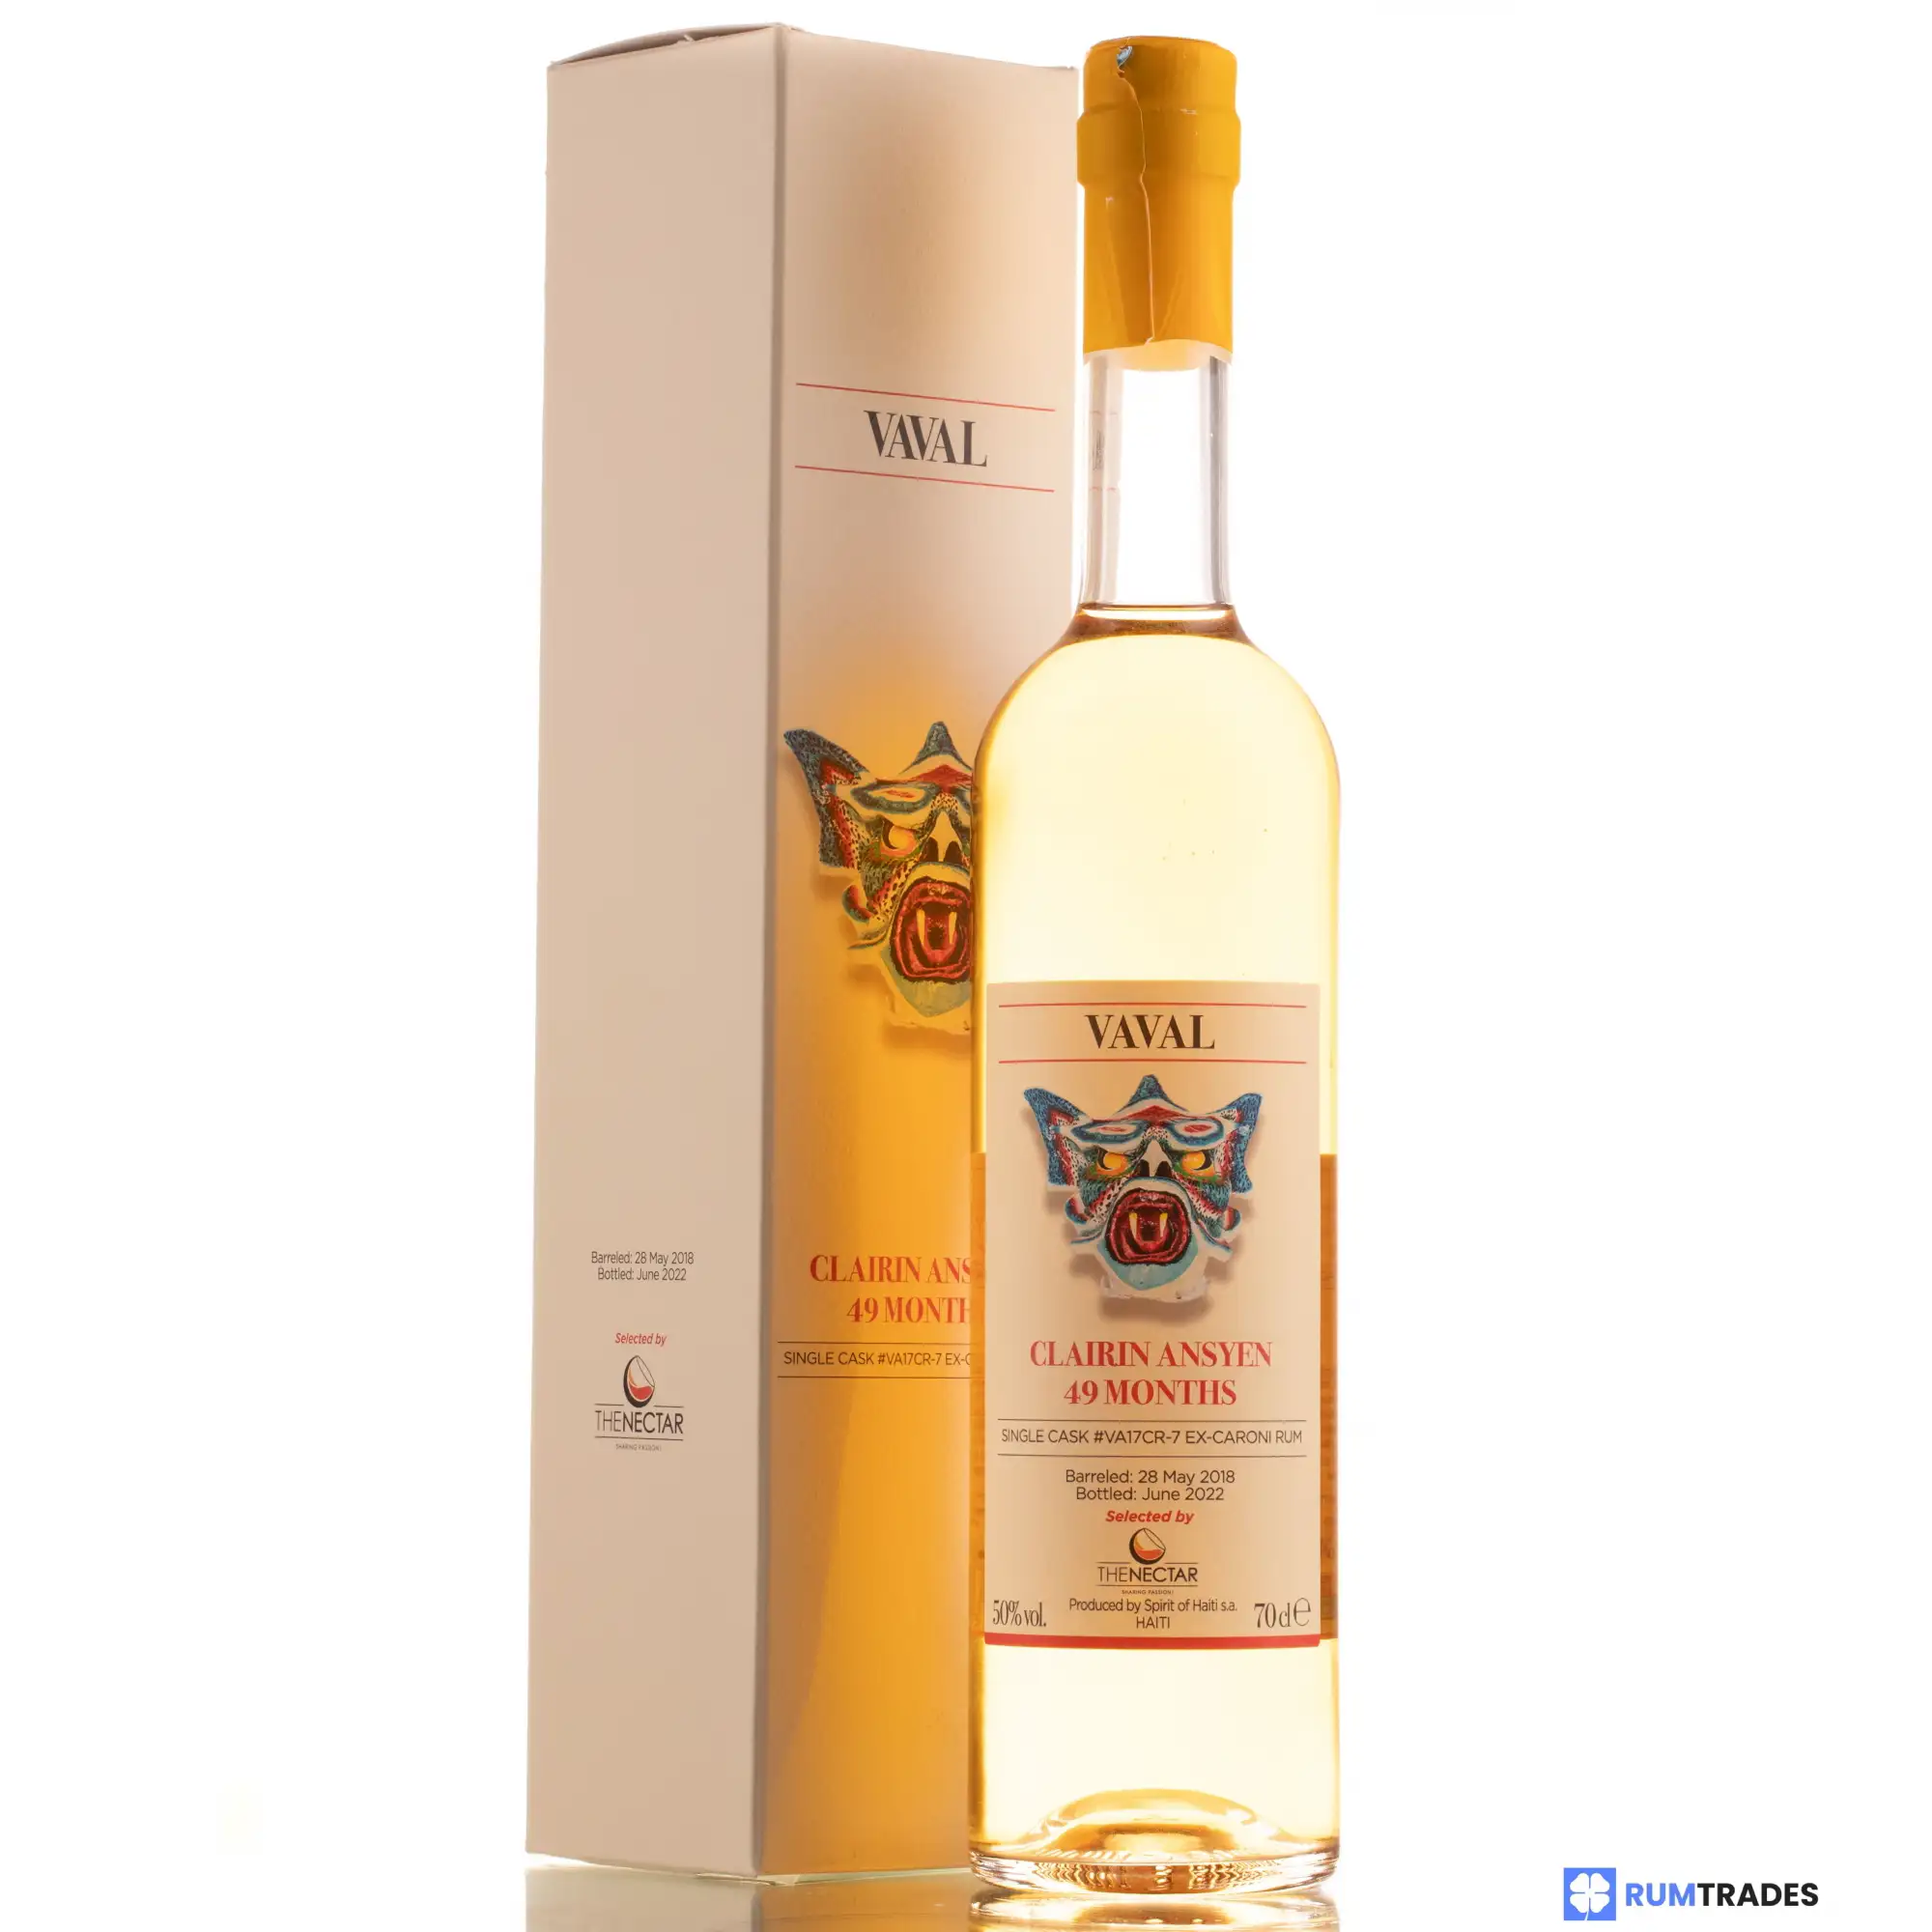 Image of the front of the bottle of the rum Clairin Ansyen Vaval (The Nectar)